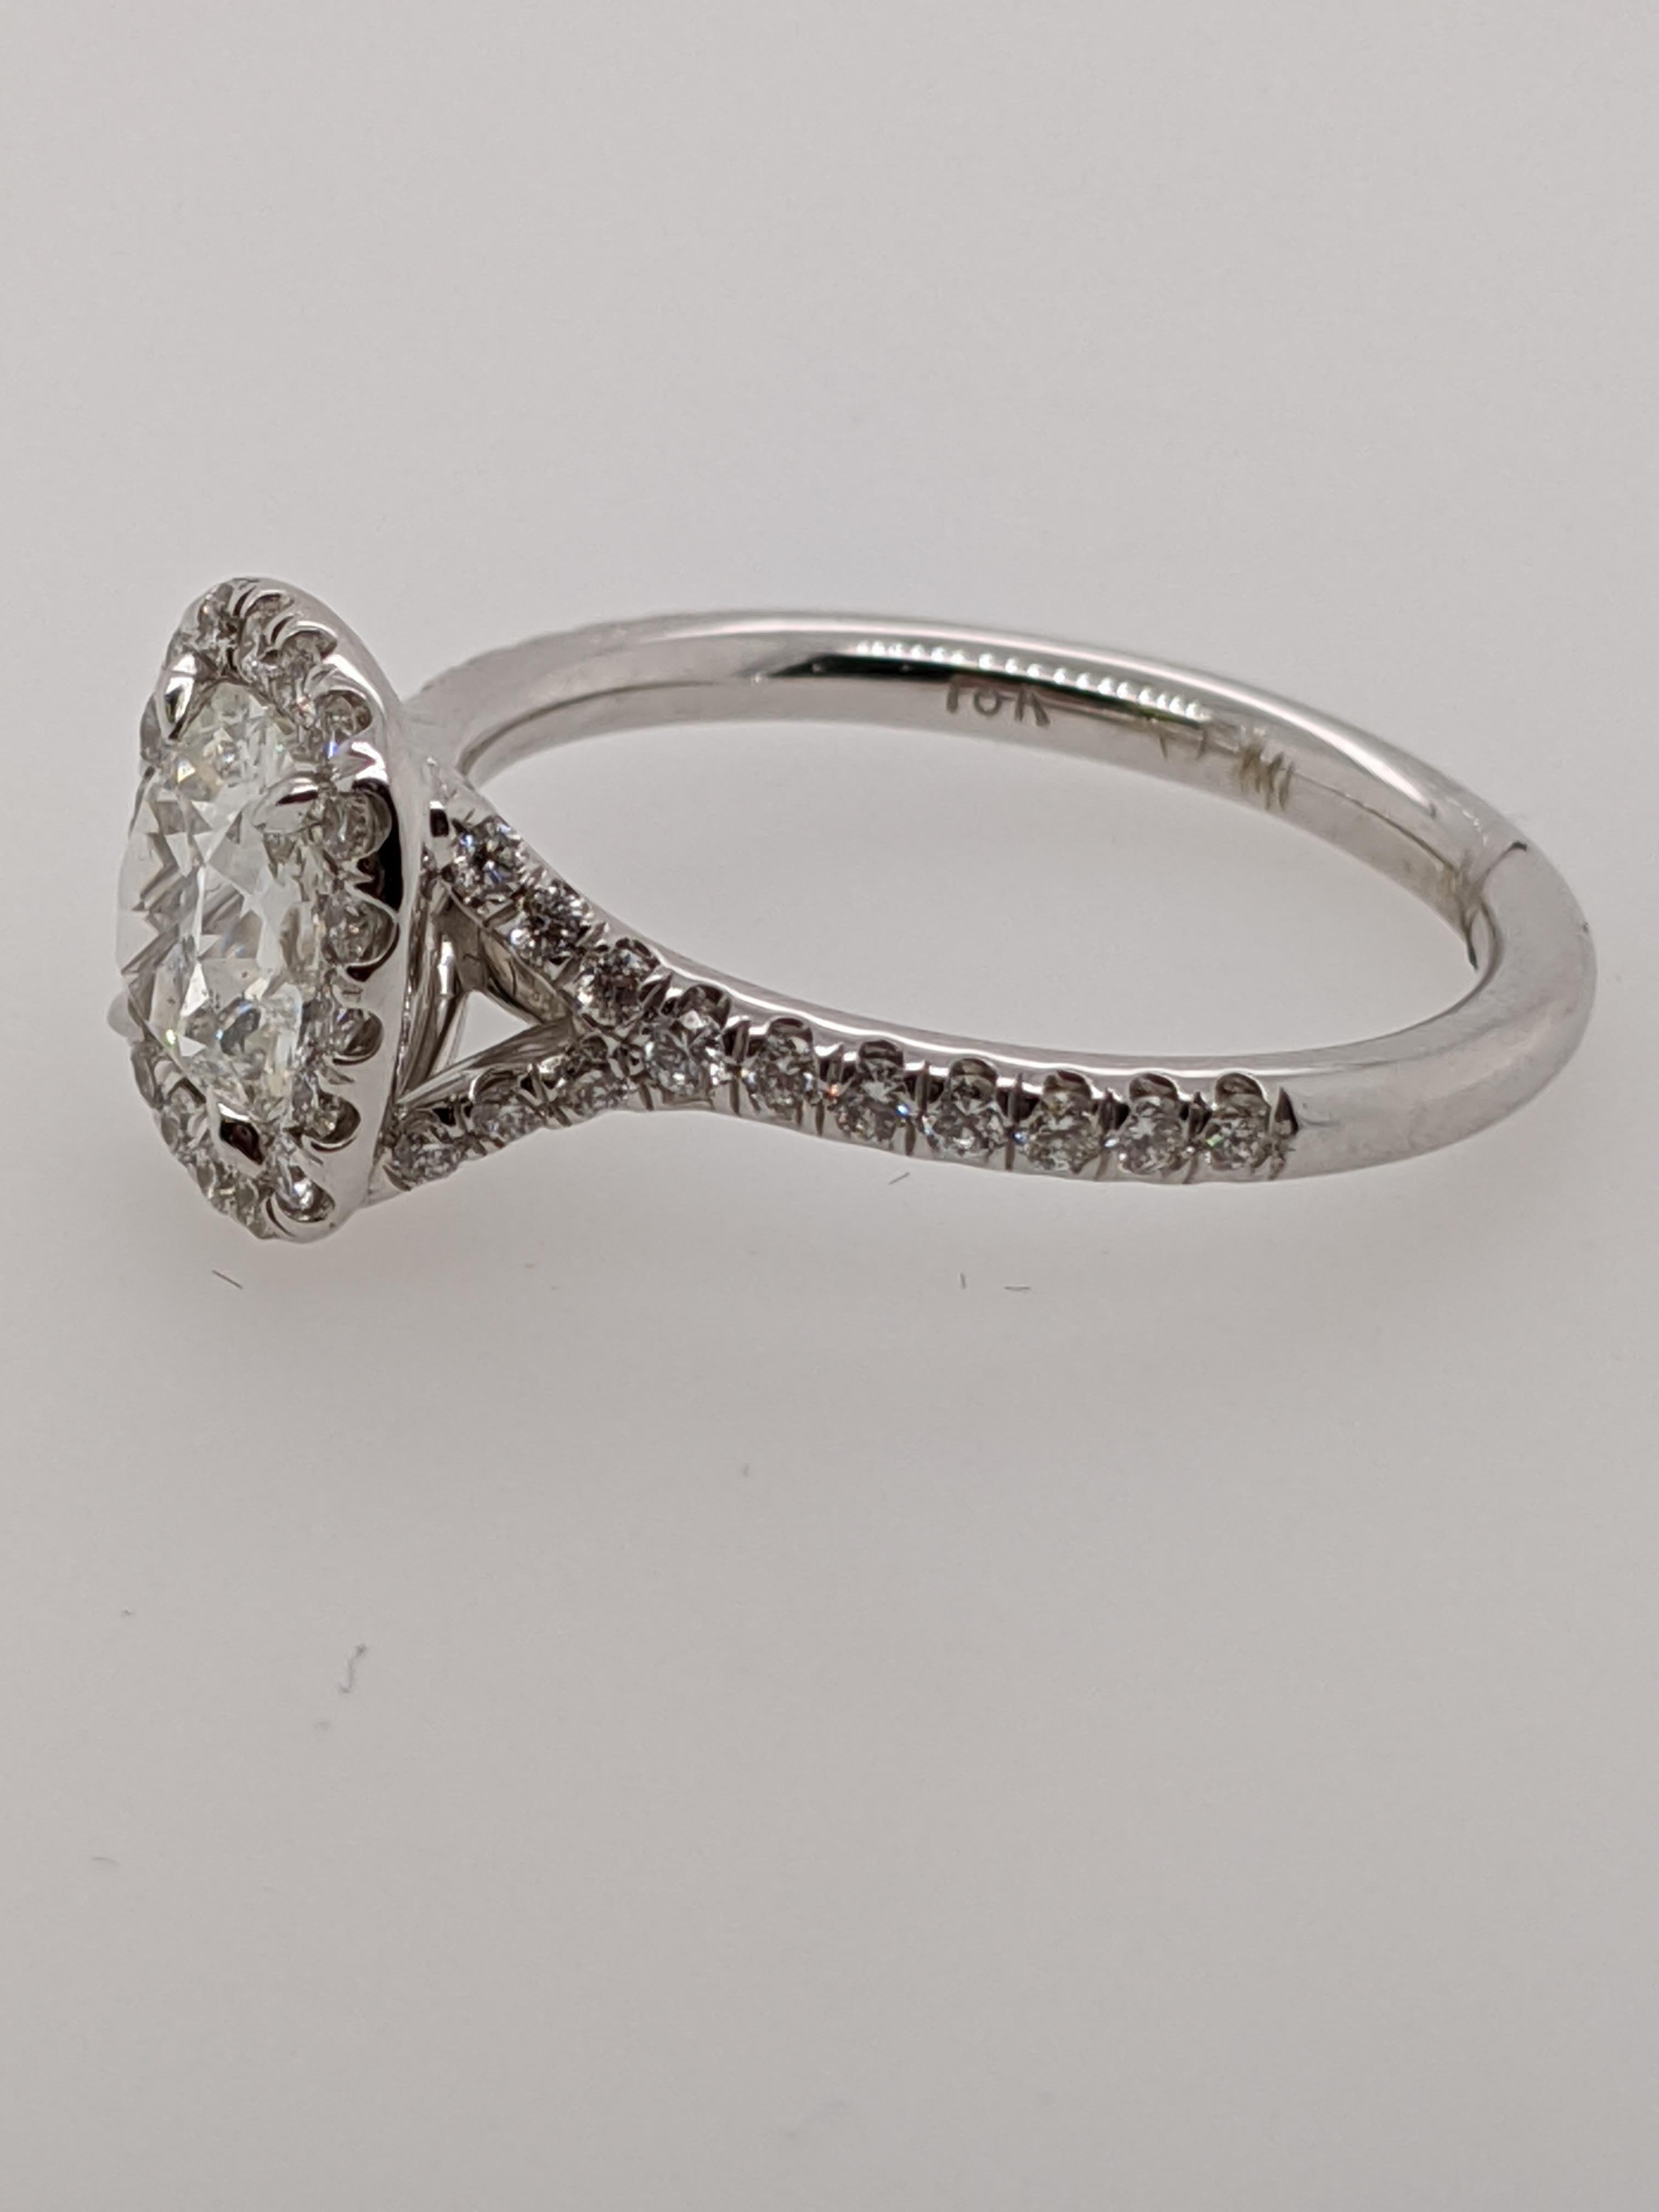 Classic 18 karat white gold split shank halo ring handmade in the United States.  Featuring a 1.02 carat J color I1 clarity antique style cushion with GIA grading report number 5201397767.

This listing has one of hundreds of cushion cut diamonds in